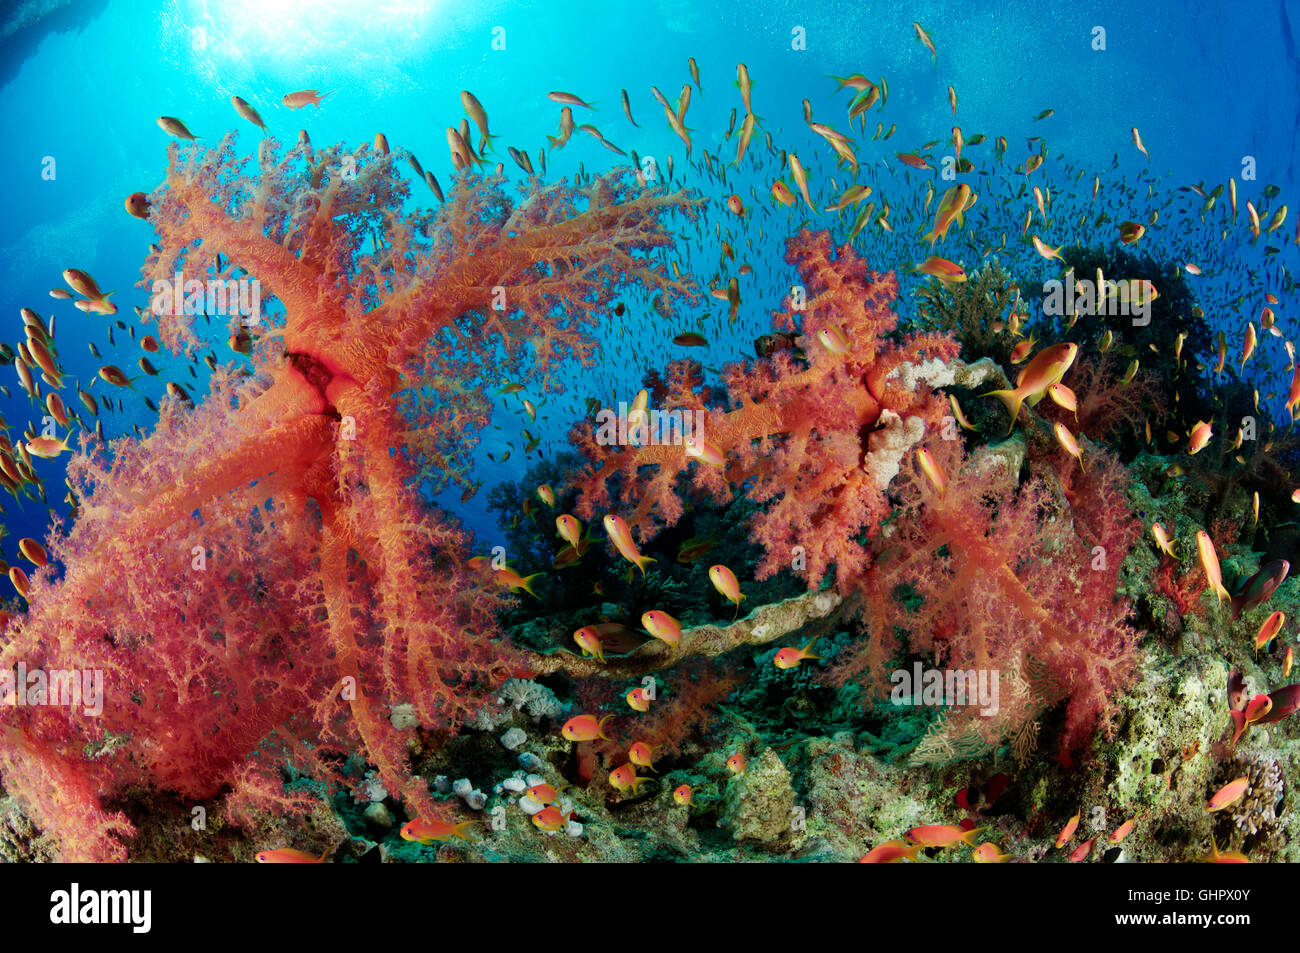 Coral reef with Hemprichs Red Soft Tree Coral and Orange Basslet or Sea Goldie, Hurghada, Giftun Island Reef, Red Sea, Egypt Stock Photo